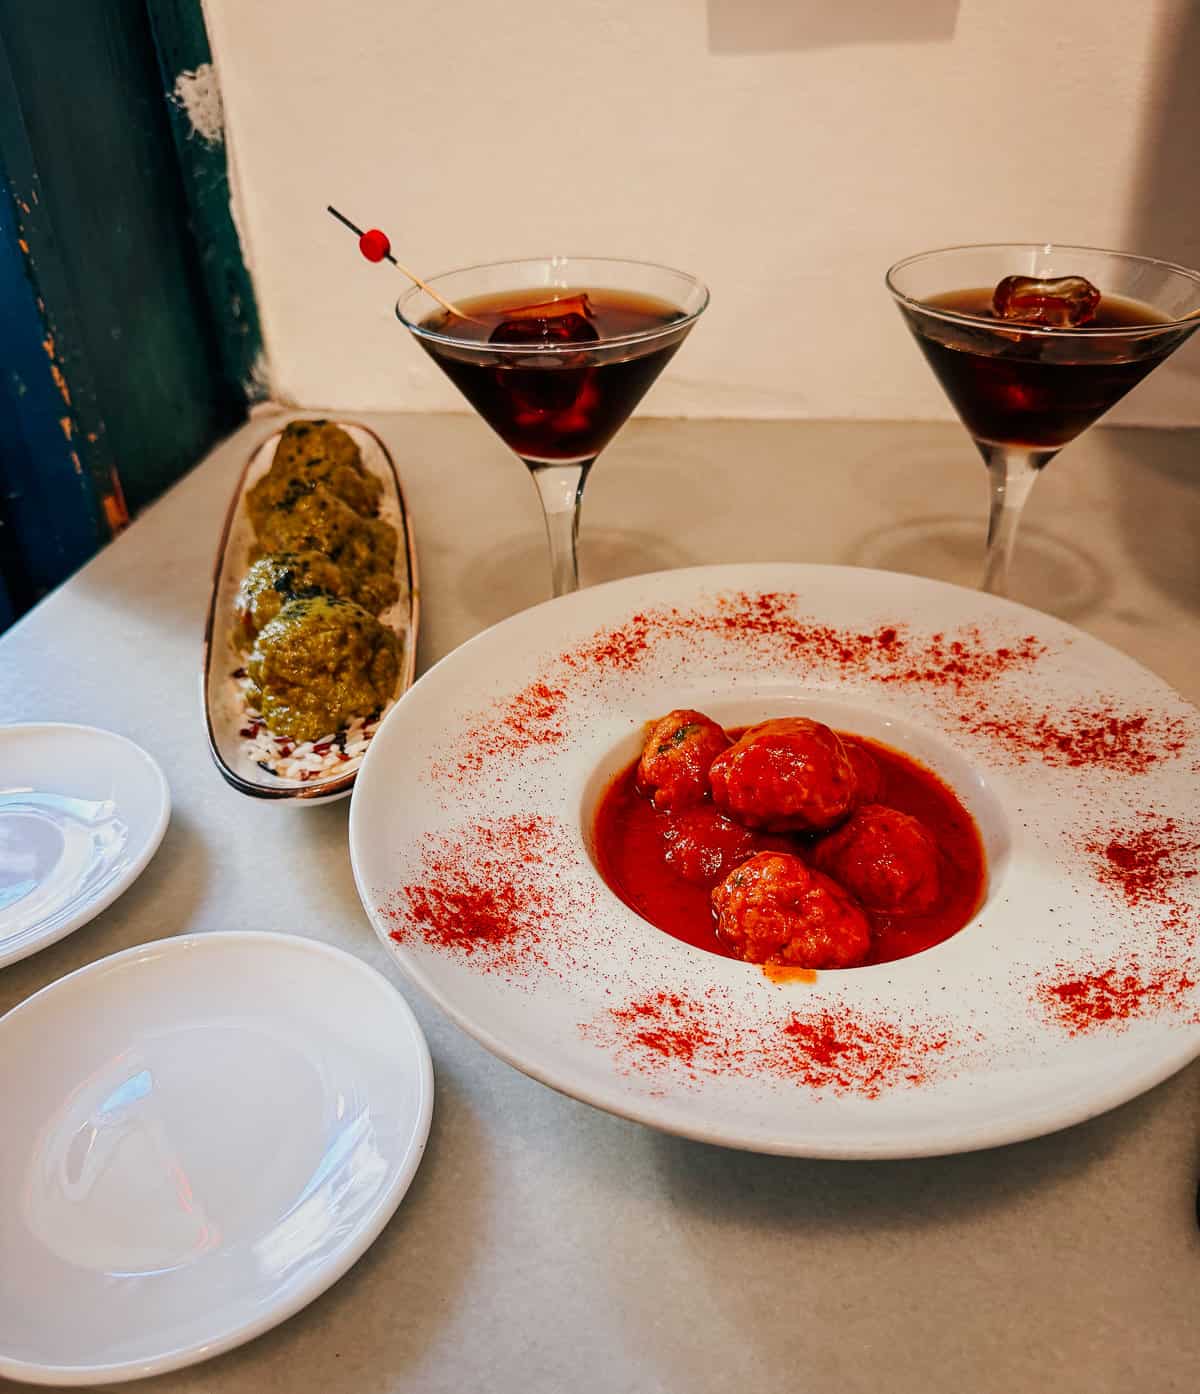 Dining table view featuring a long oval plate of green, herb-coated meatballs next to two martini glasses with red cocktails, and empty white plates, suggesting a prepared dining experience